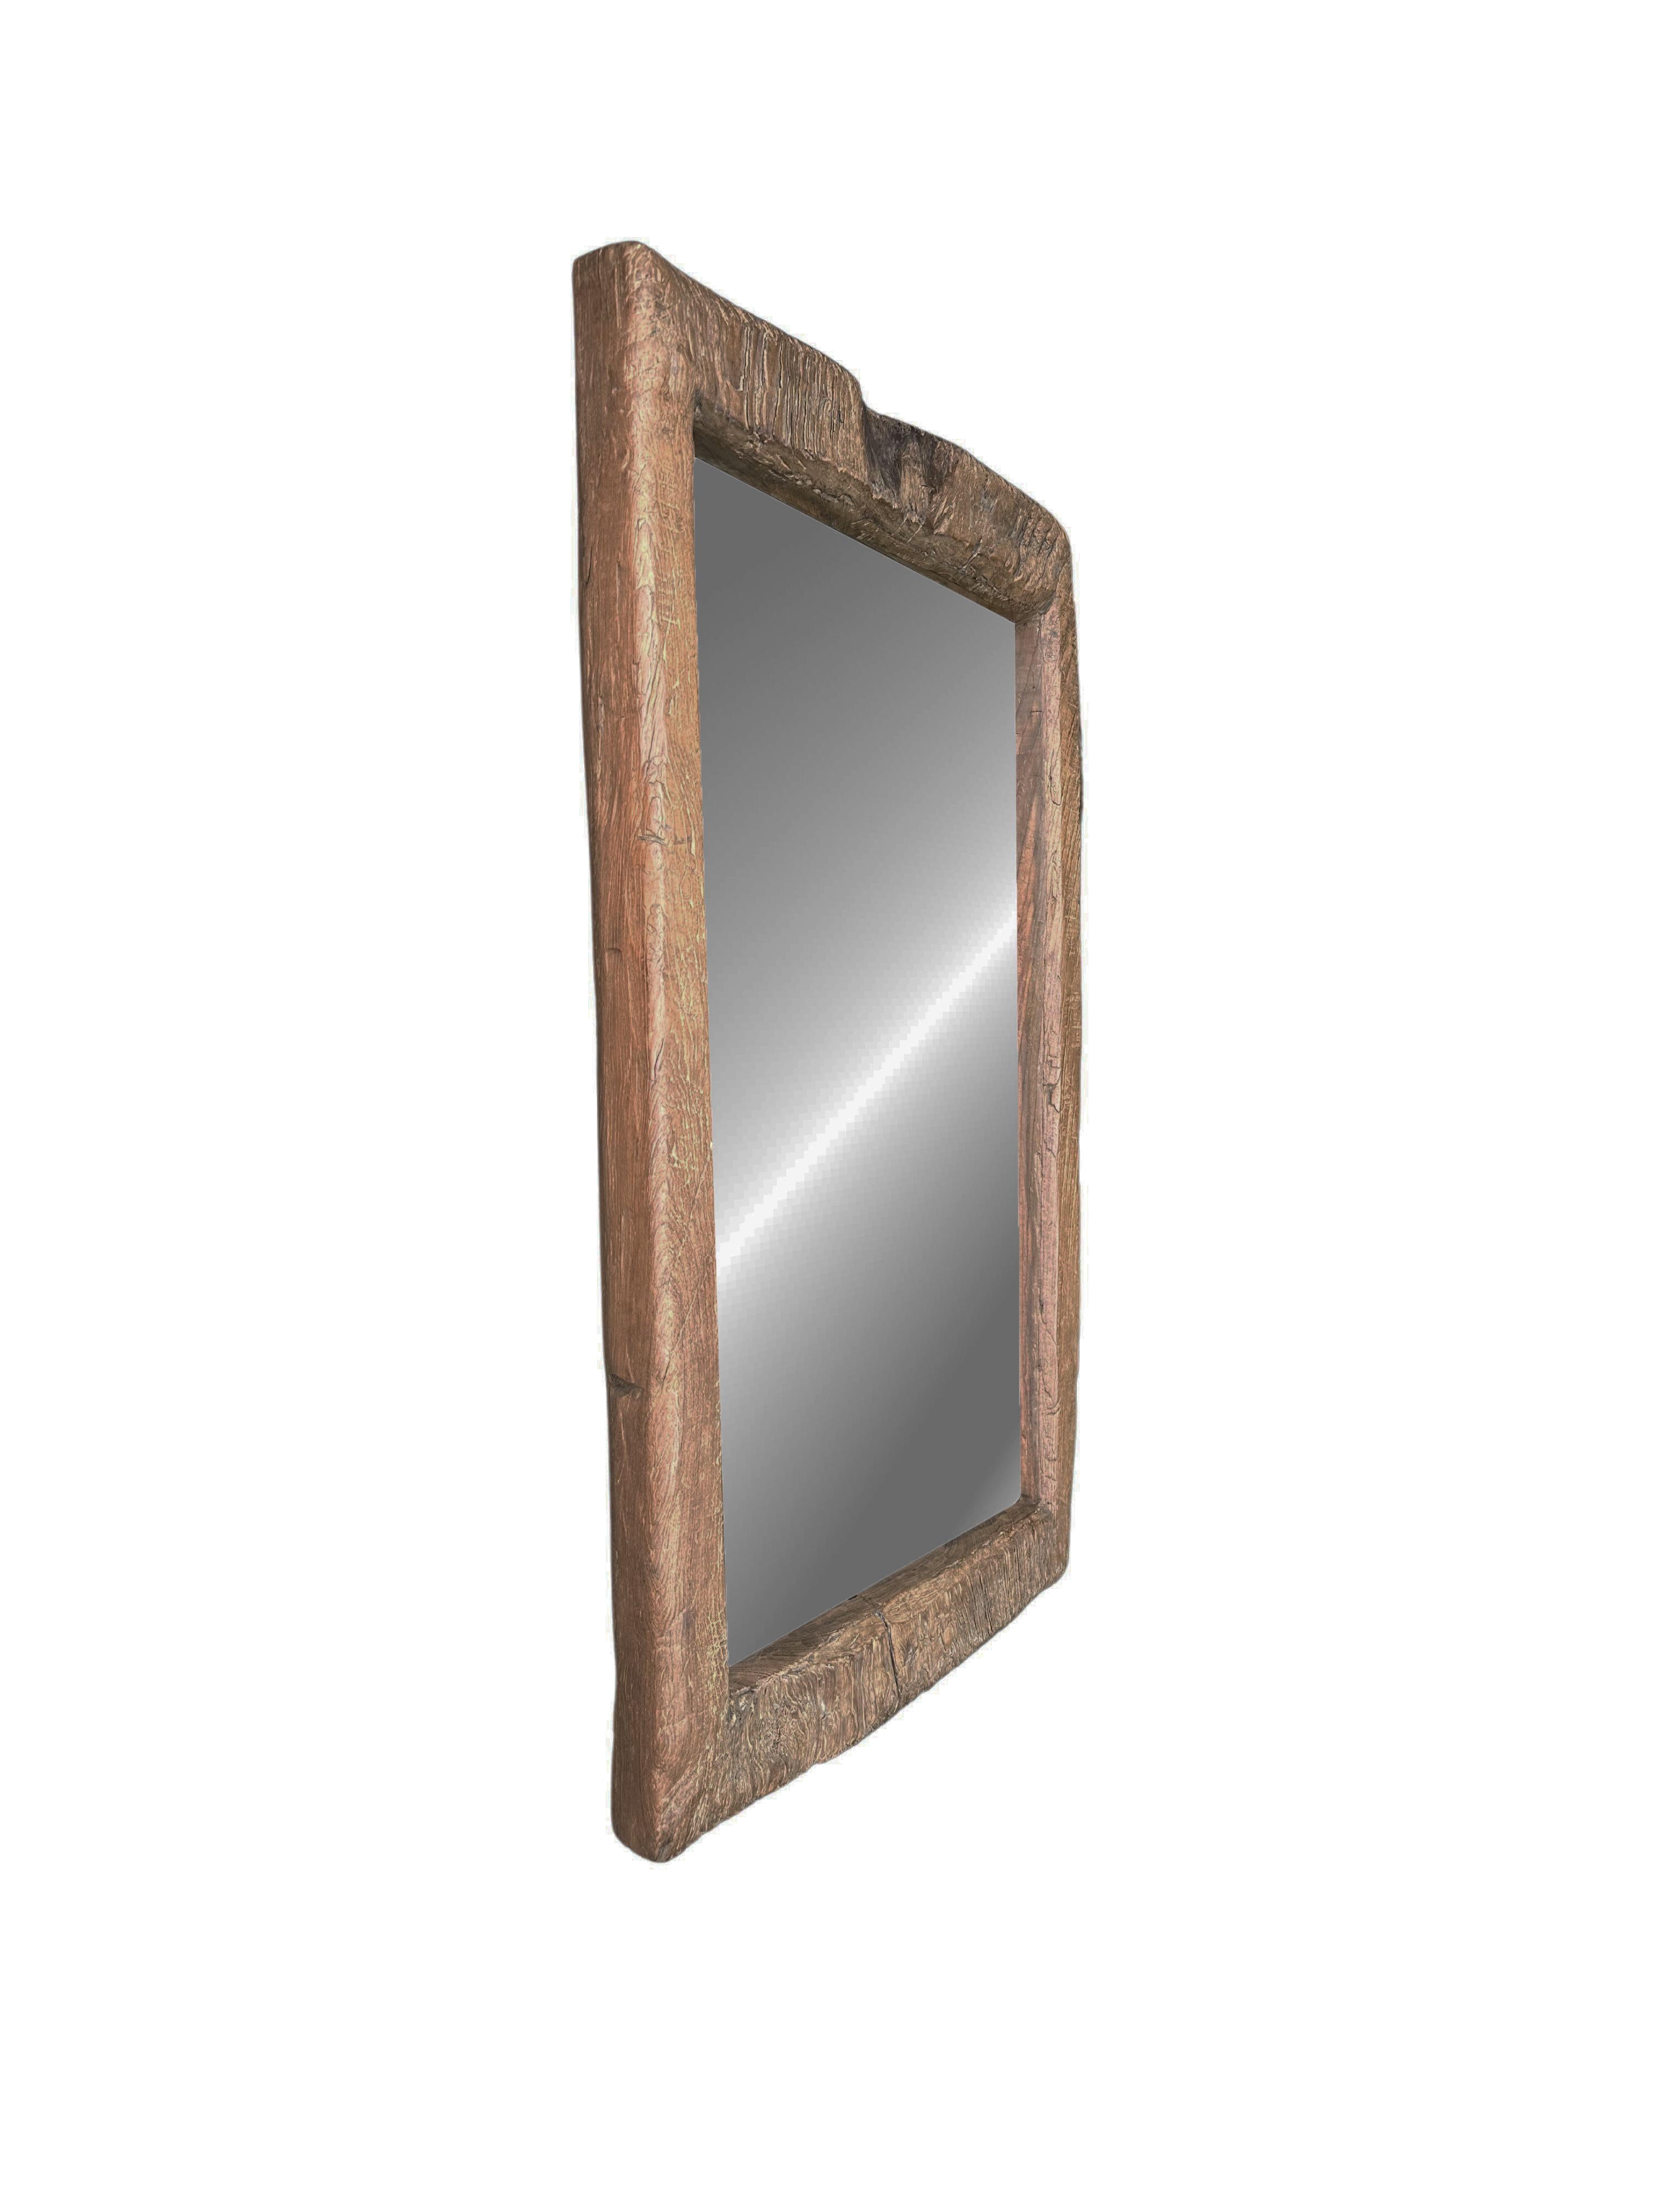 Organic Modern Rustic Teak Wood Mirror With Wonderful Age Related Patina & Markings For Sale